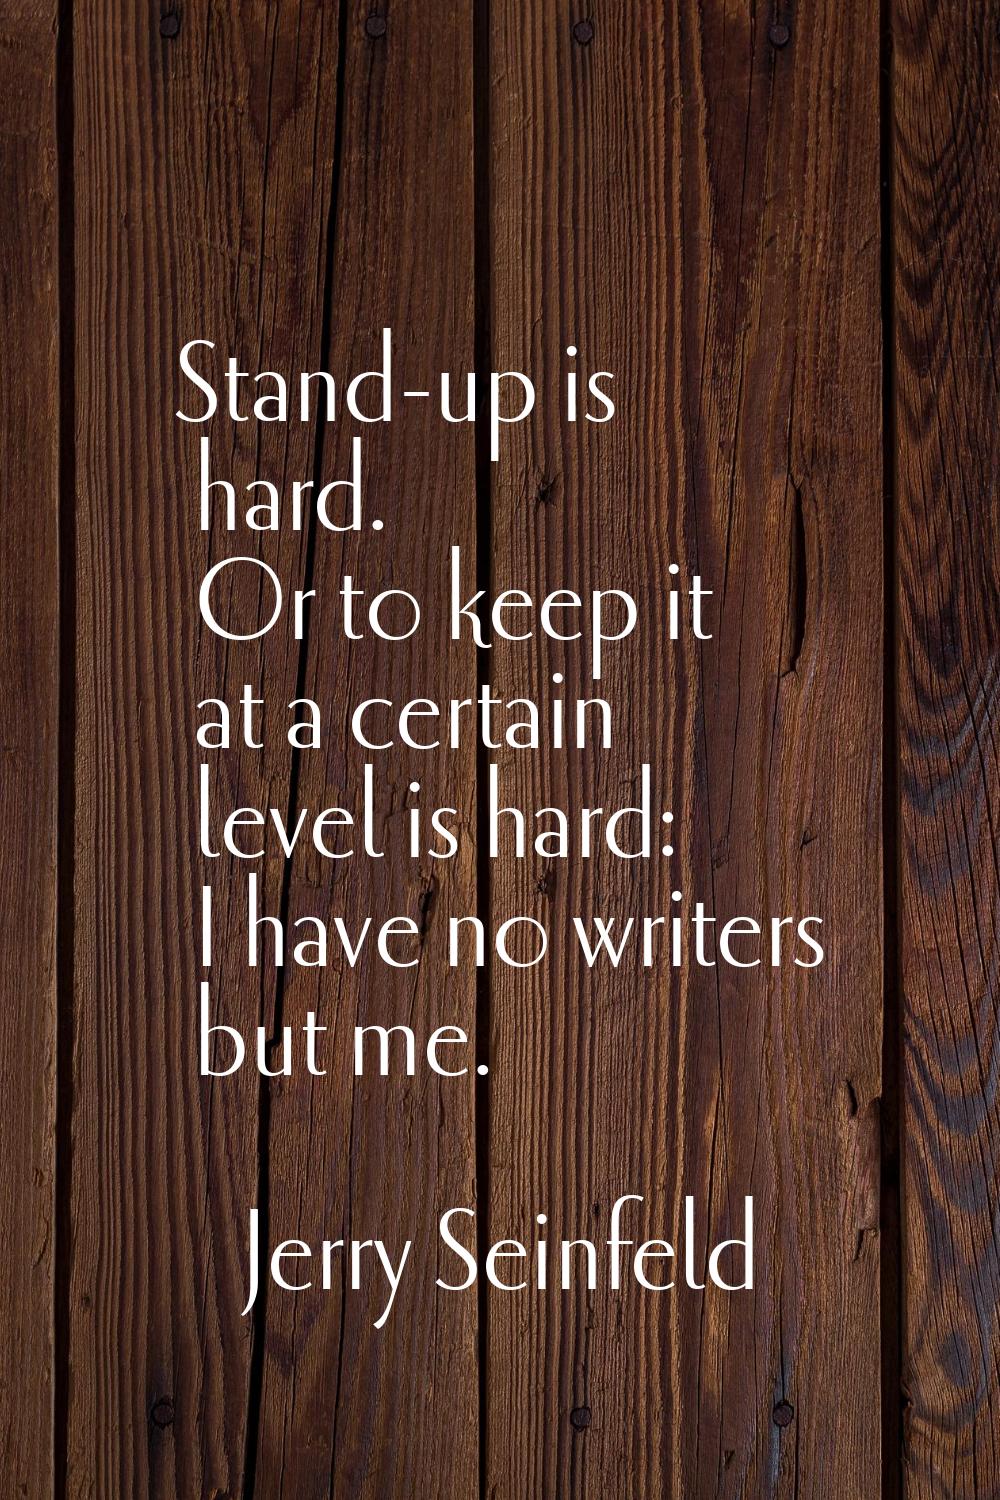 Stand-up is hard. Or to keep it at a certain level is hard: I have no writers but me.